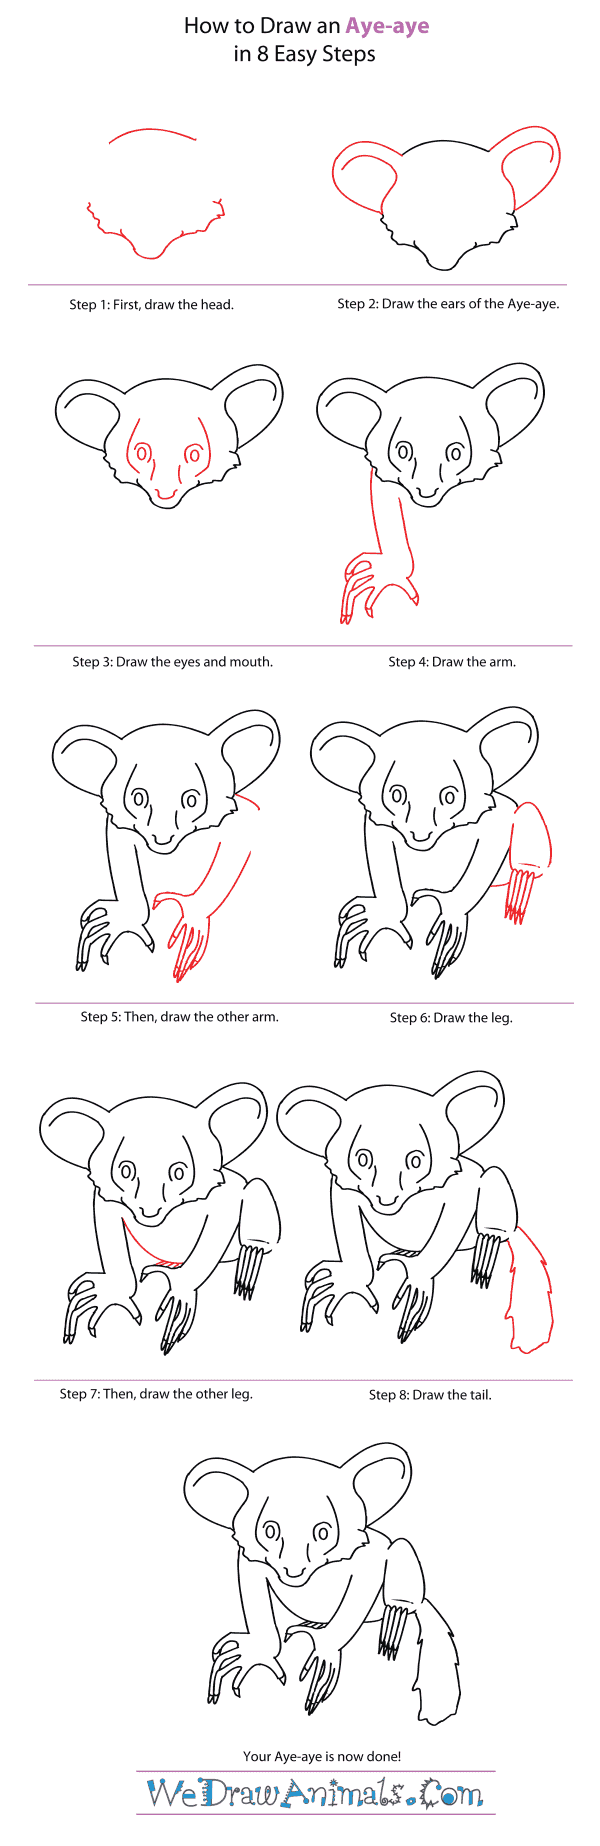 How to Draw an Aye-Aye - Step-By-Step Tutorial